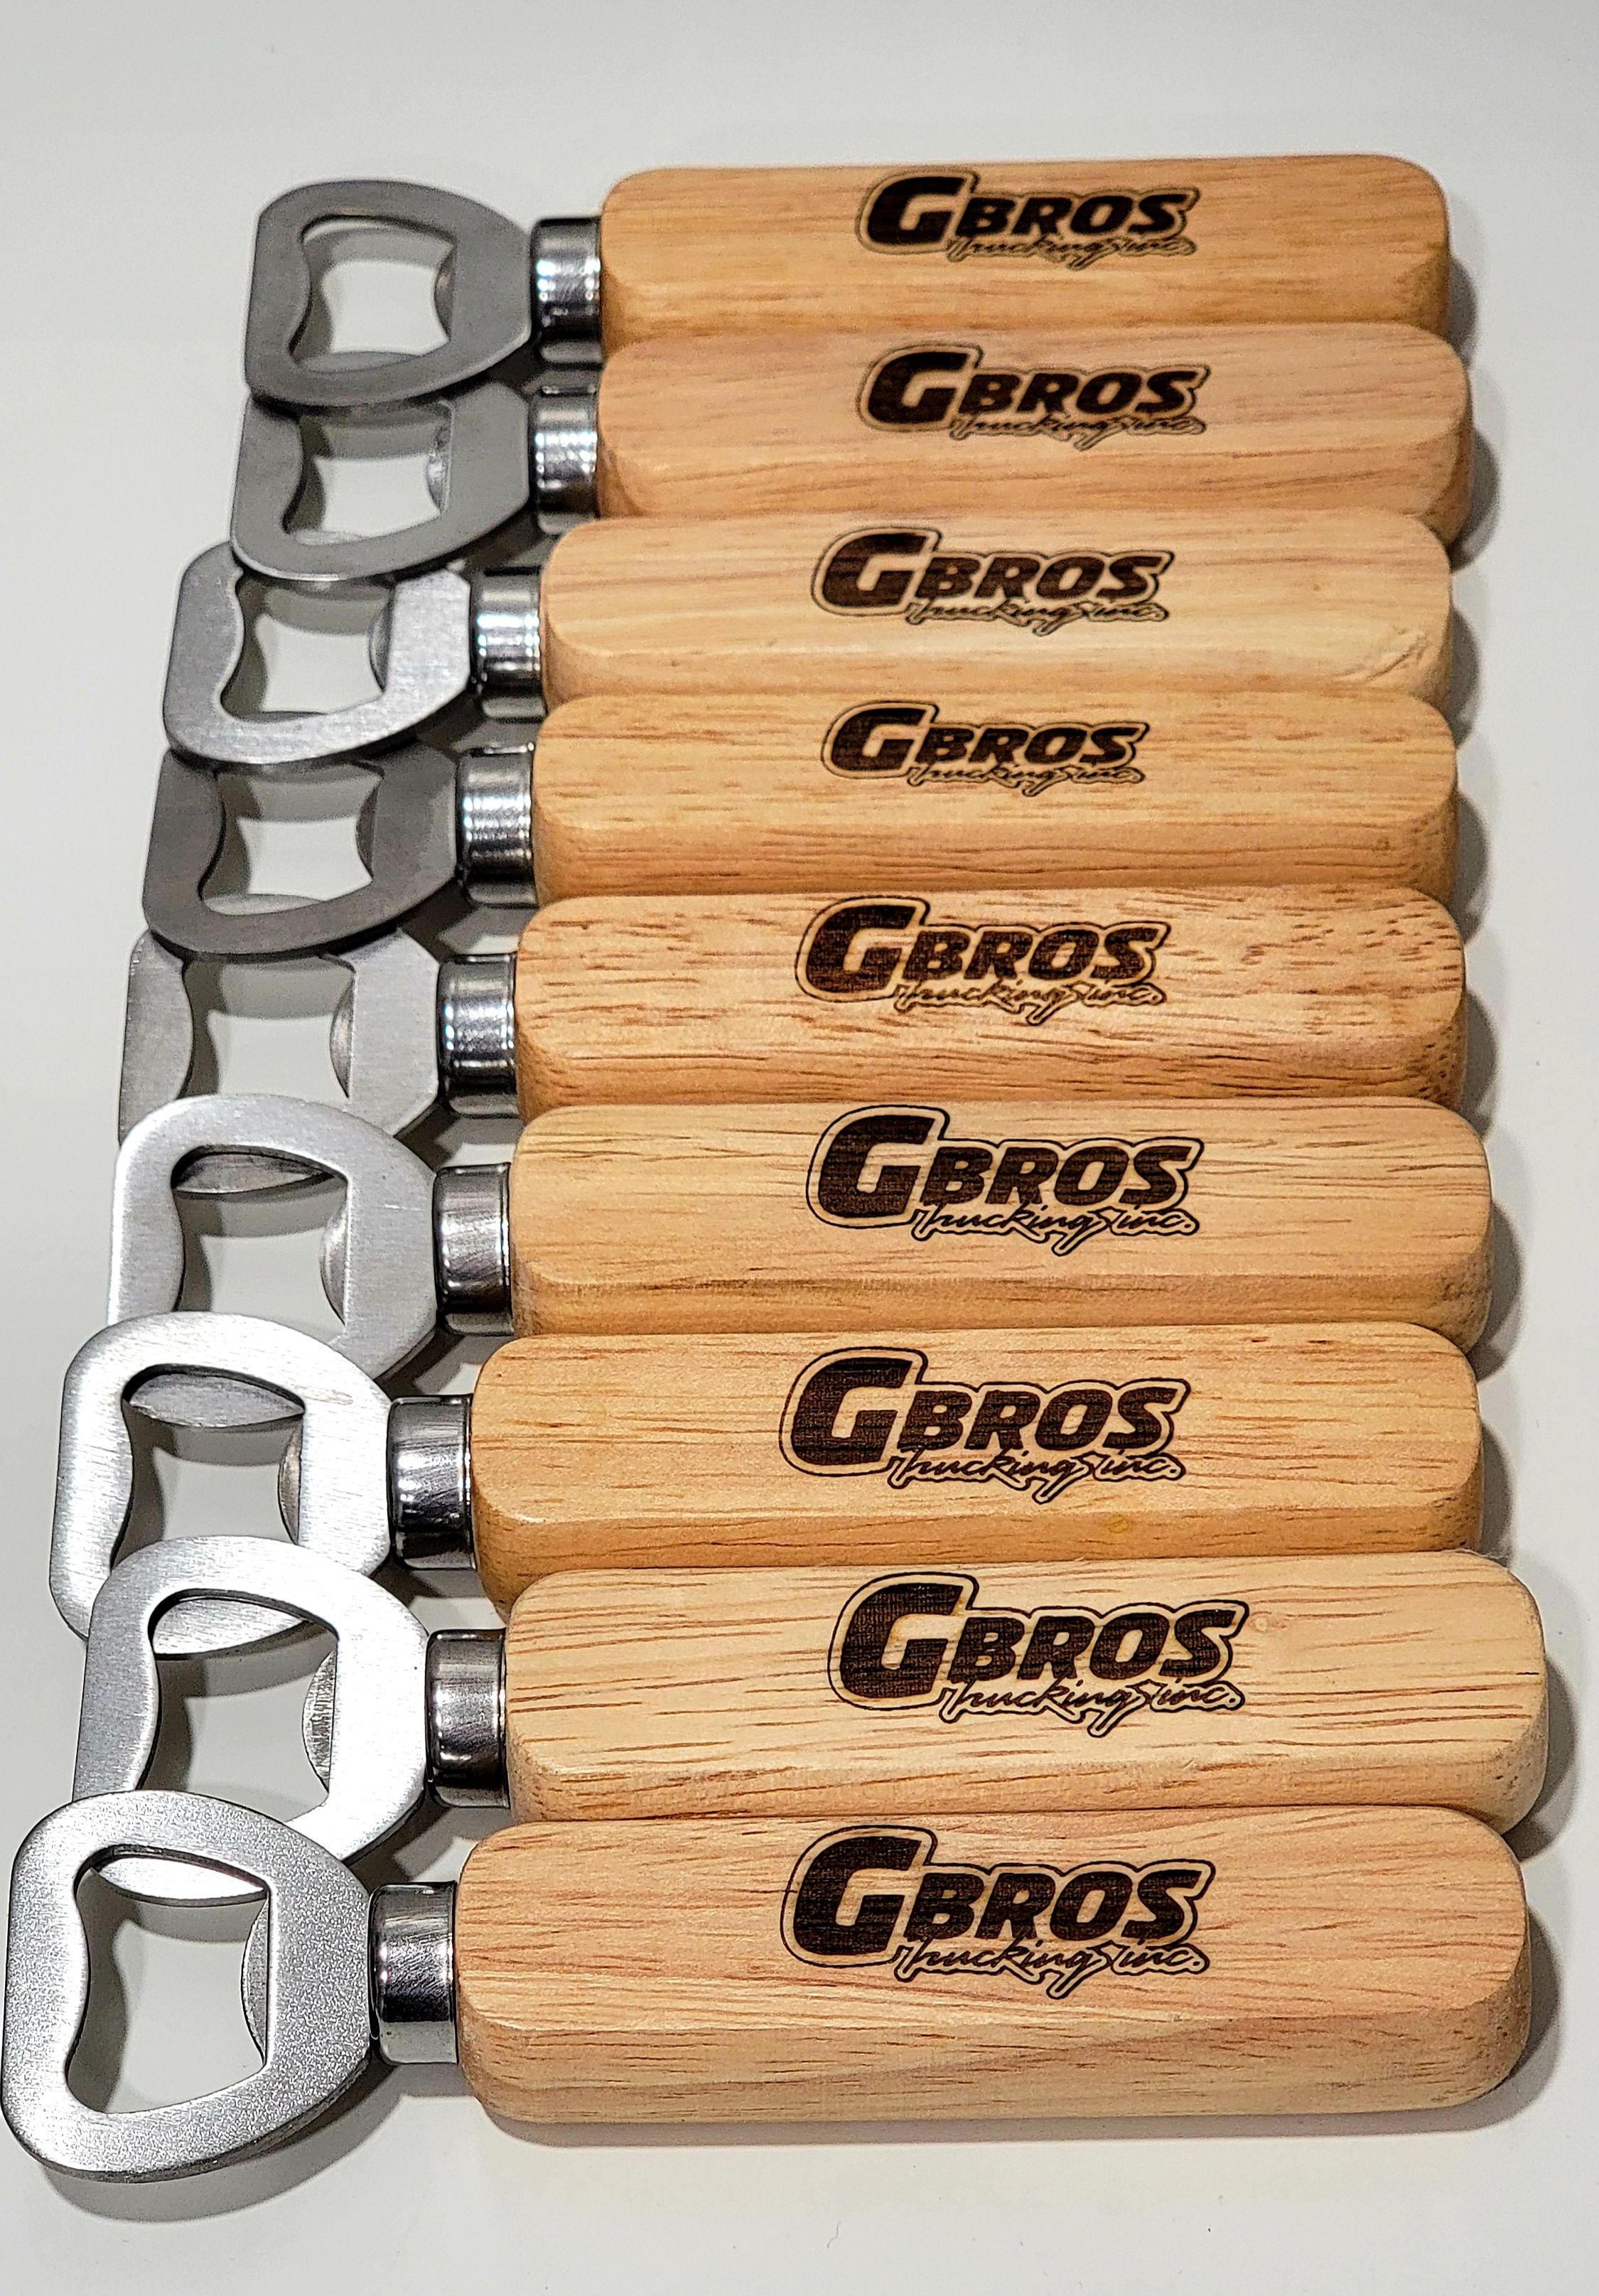 Bottle openers for your company